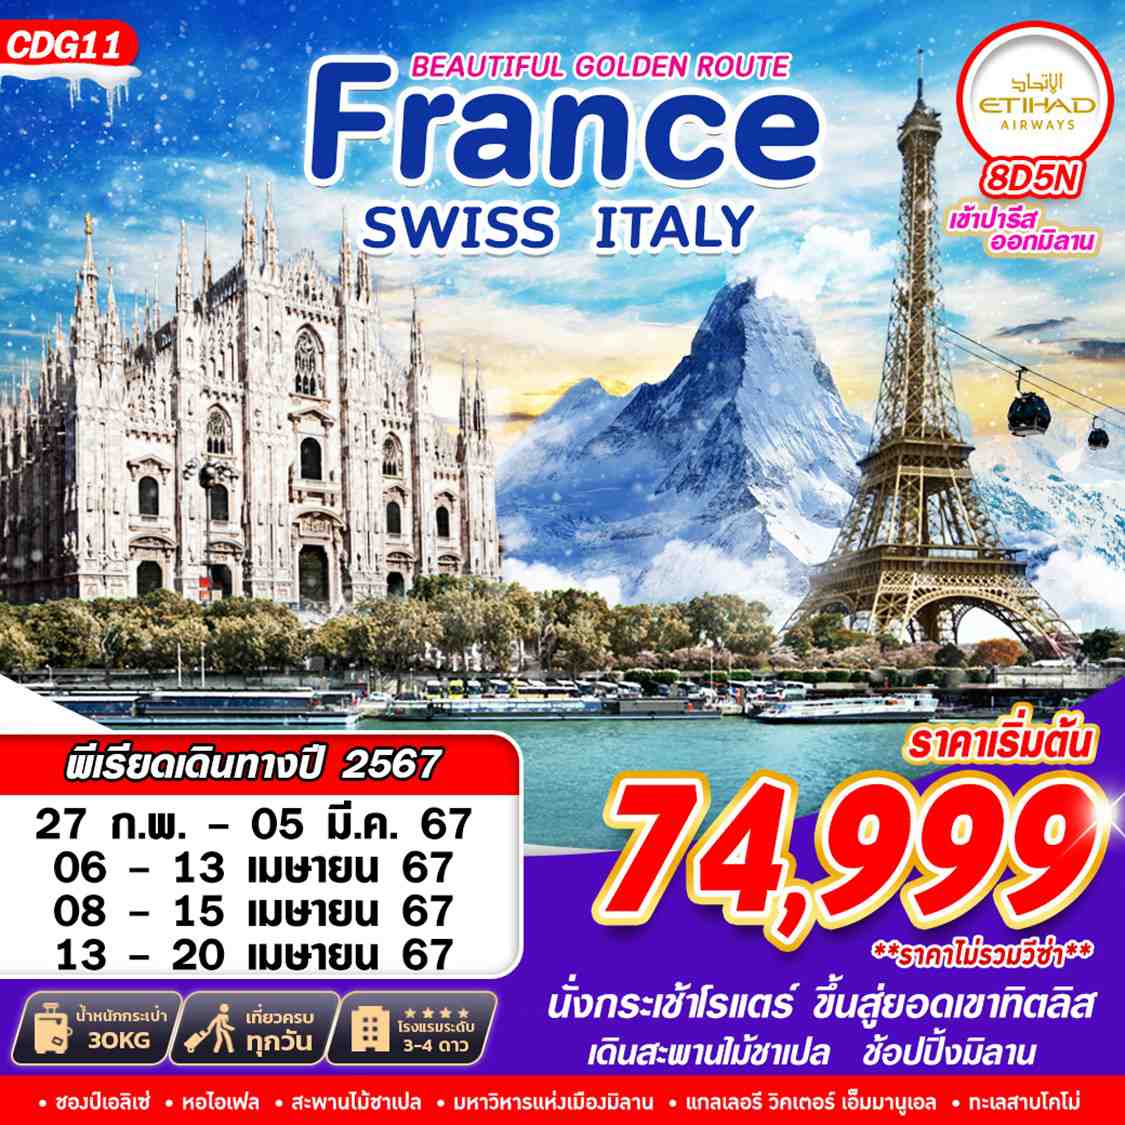 BEAUTIFUL GOLDEN ROUTE FRANCE SWISS ITALY8D5N BY EY 